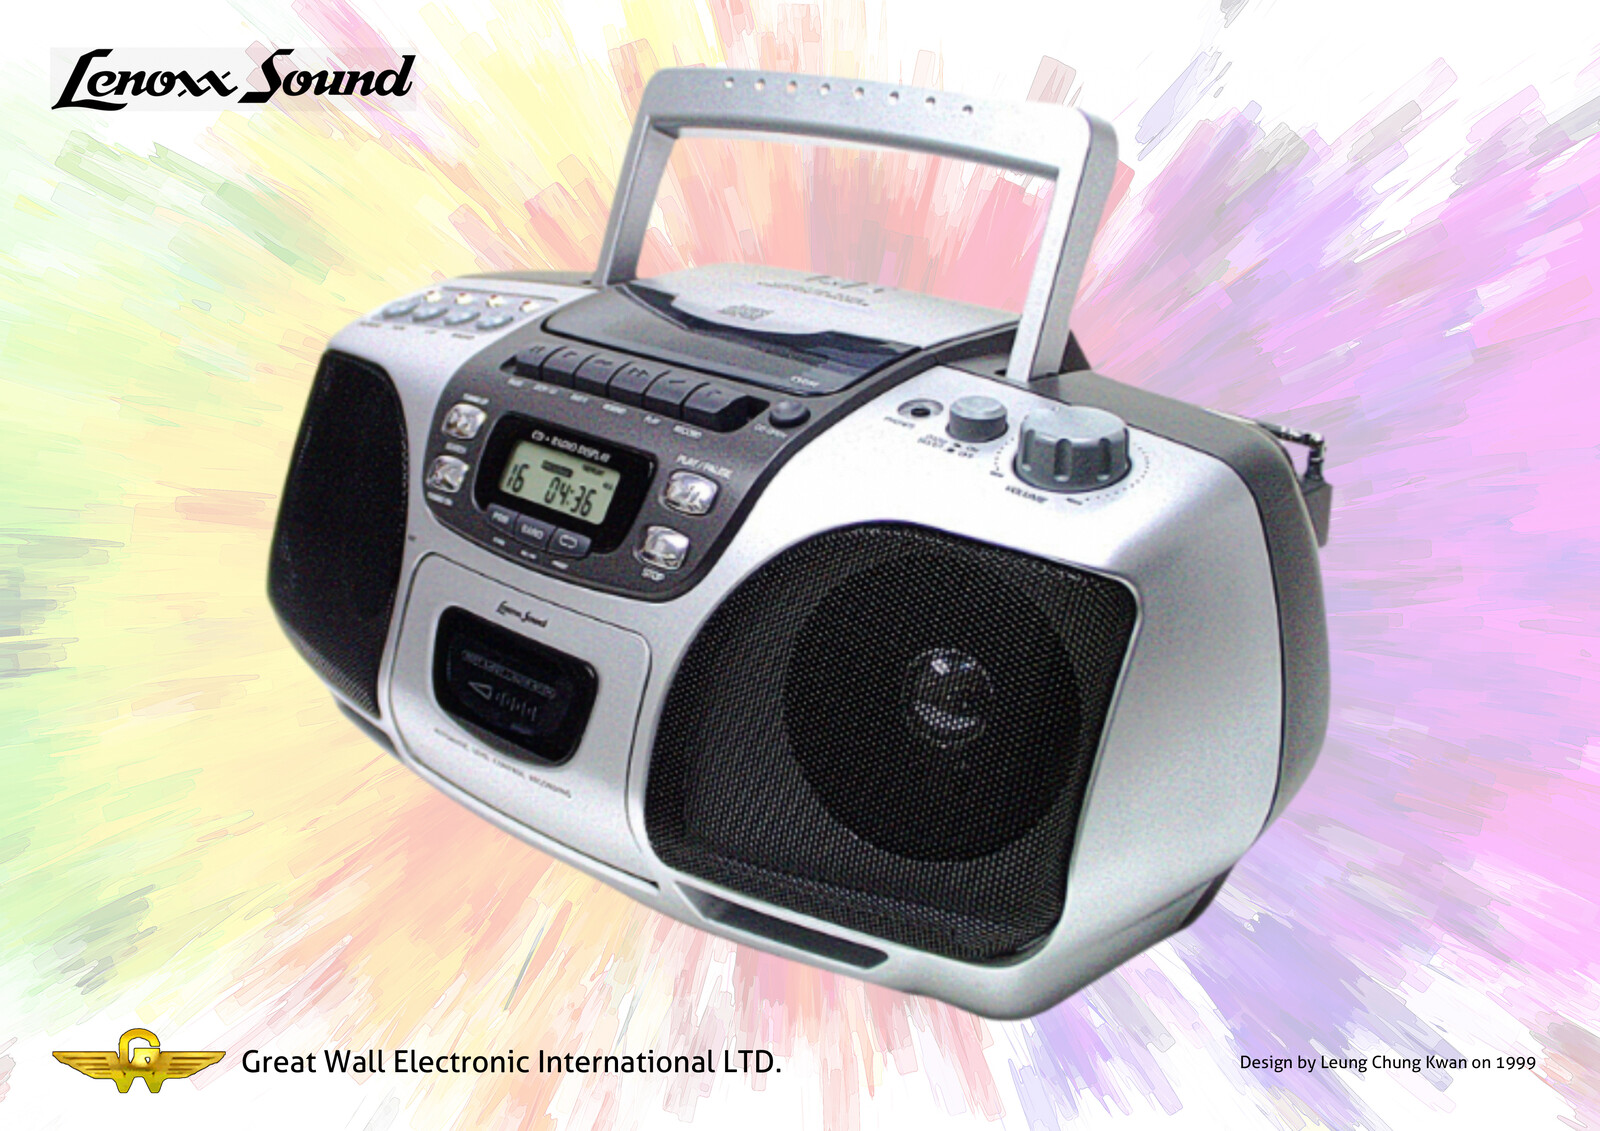 💎 CD / Cassette / PLL Radio BoomBox | Design by Leung Chung Kwan on 1999 💎
▷ Band Name︰Lenoxx Sound | Client︰Great Wall Electronics International Limited
More︰http://bit.ly/gw-p47